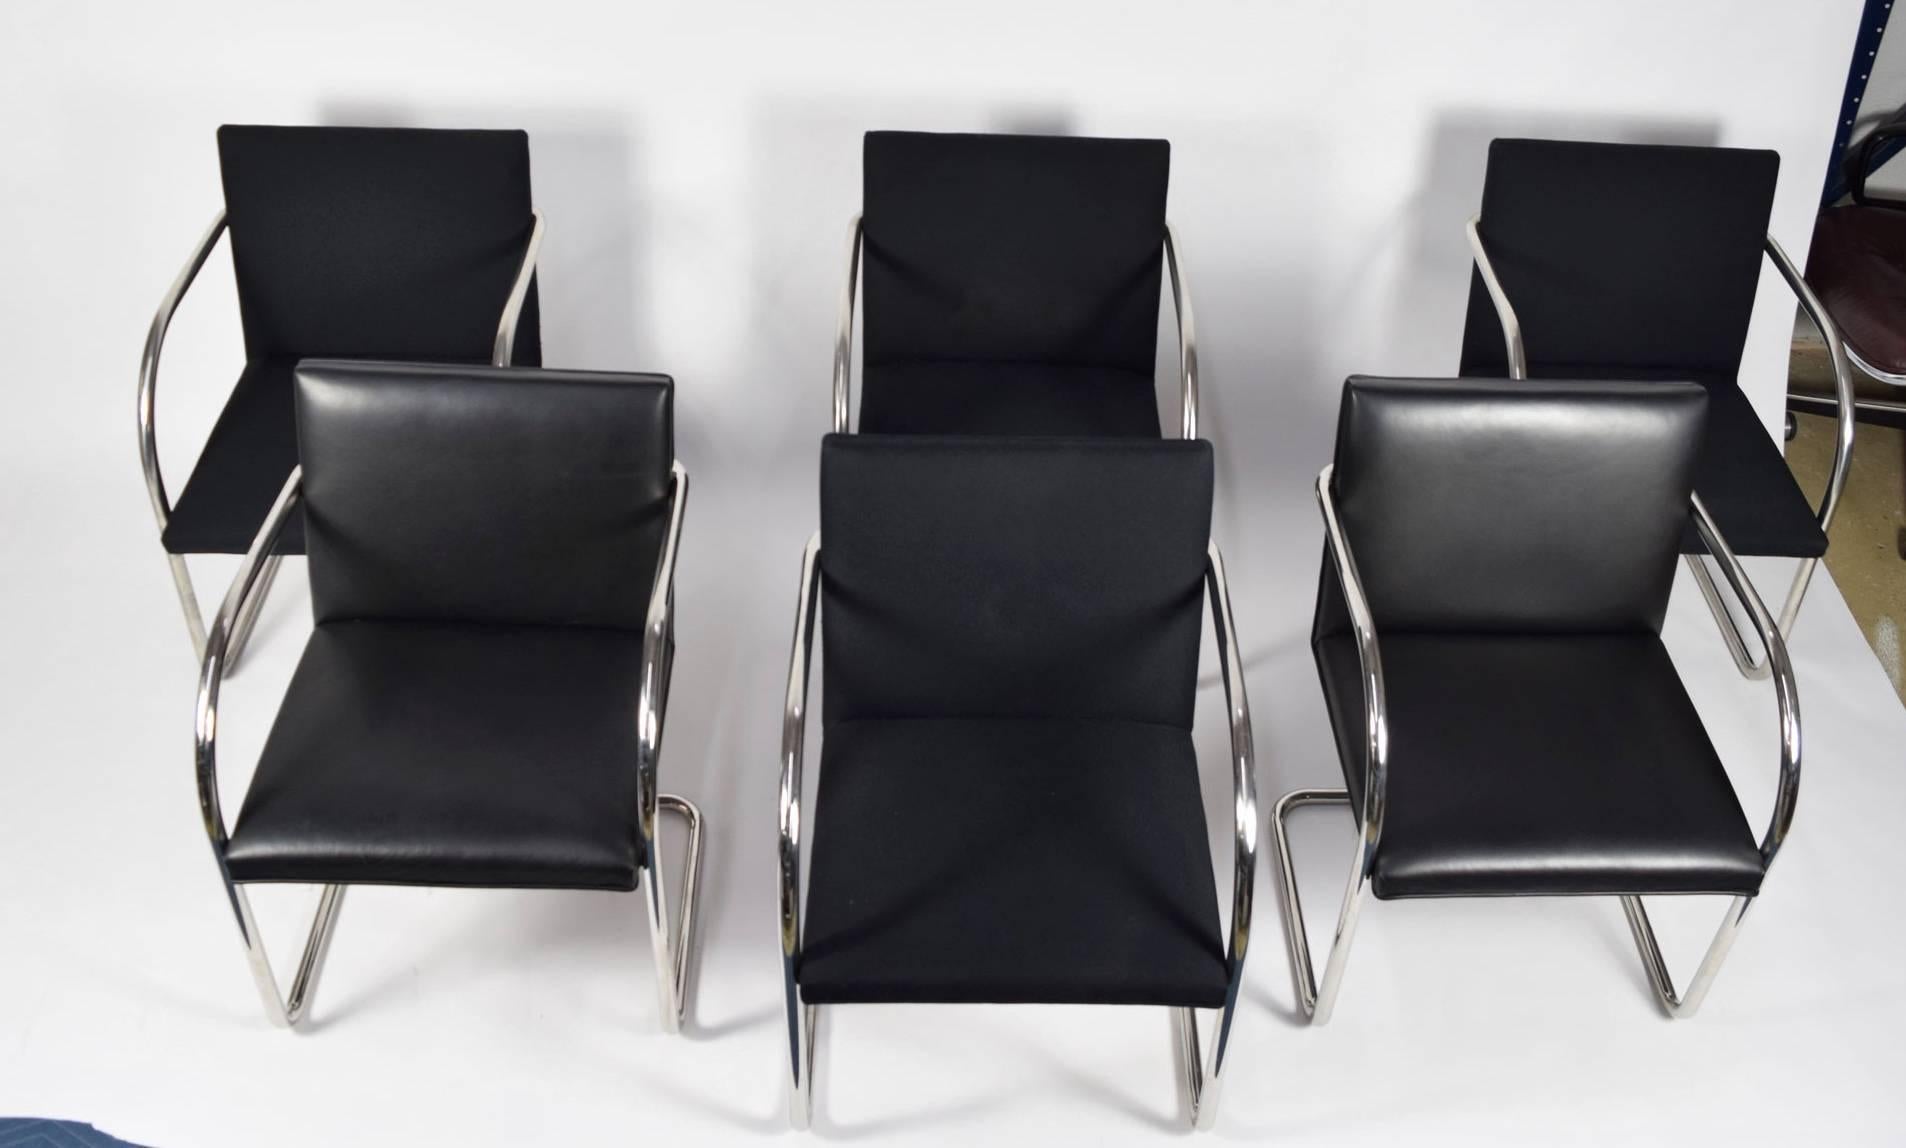 We have a set of six Brno chairs by Knoll in polished stainless steel. Two are in black leather and can be sold separately. The remaining four are in need of reupholstery. The entire set can be reupholstered in a fabric of choice. We are happy to